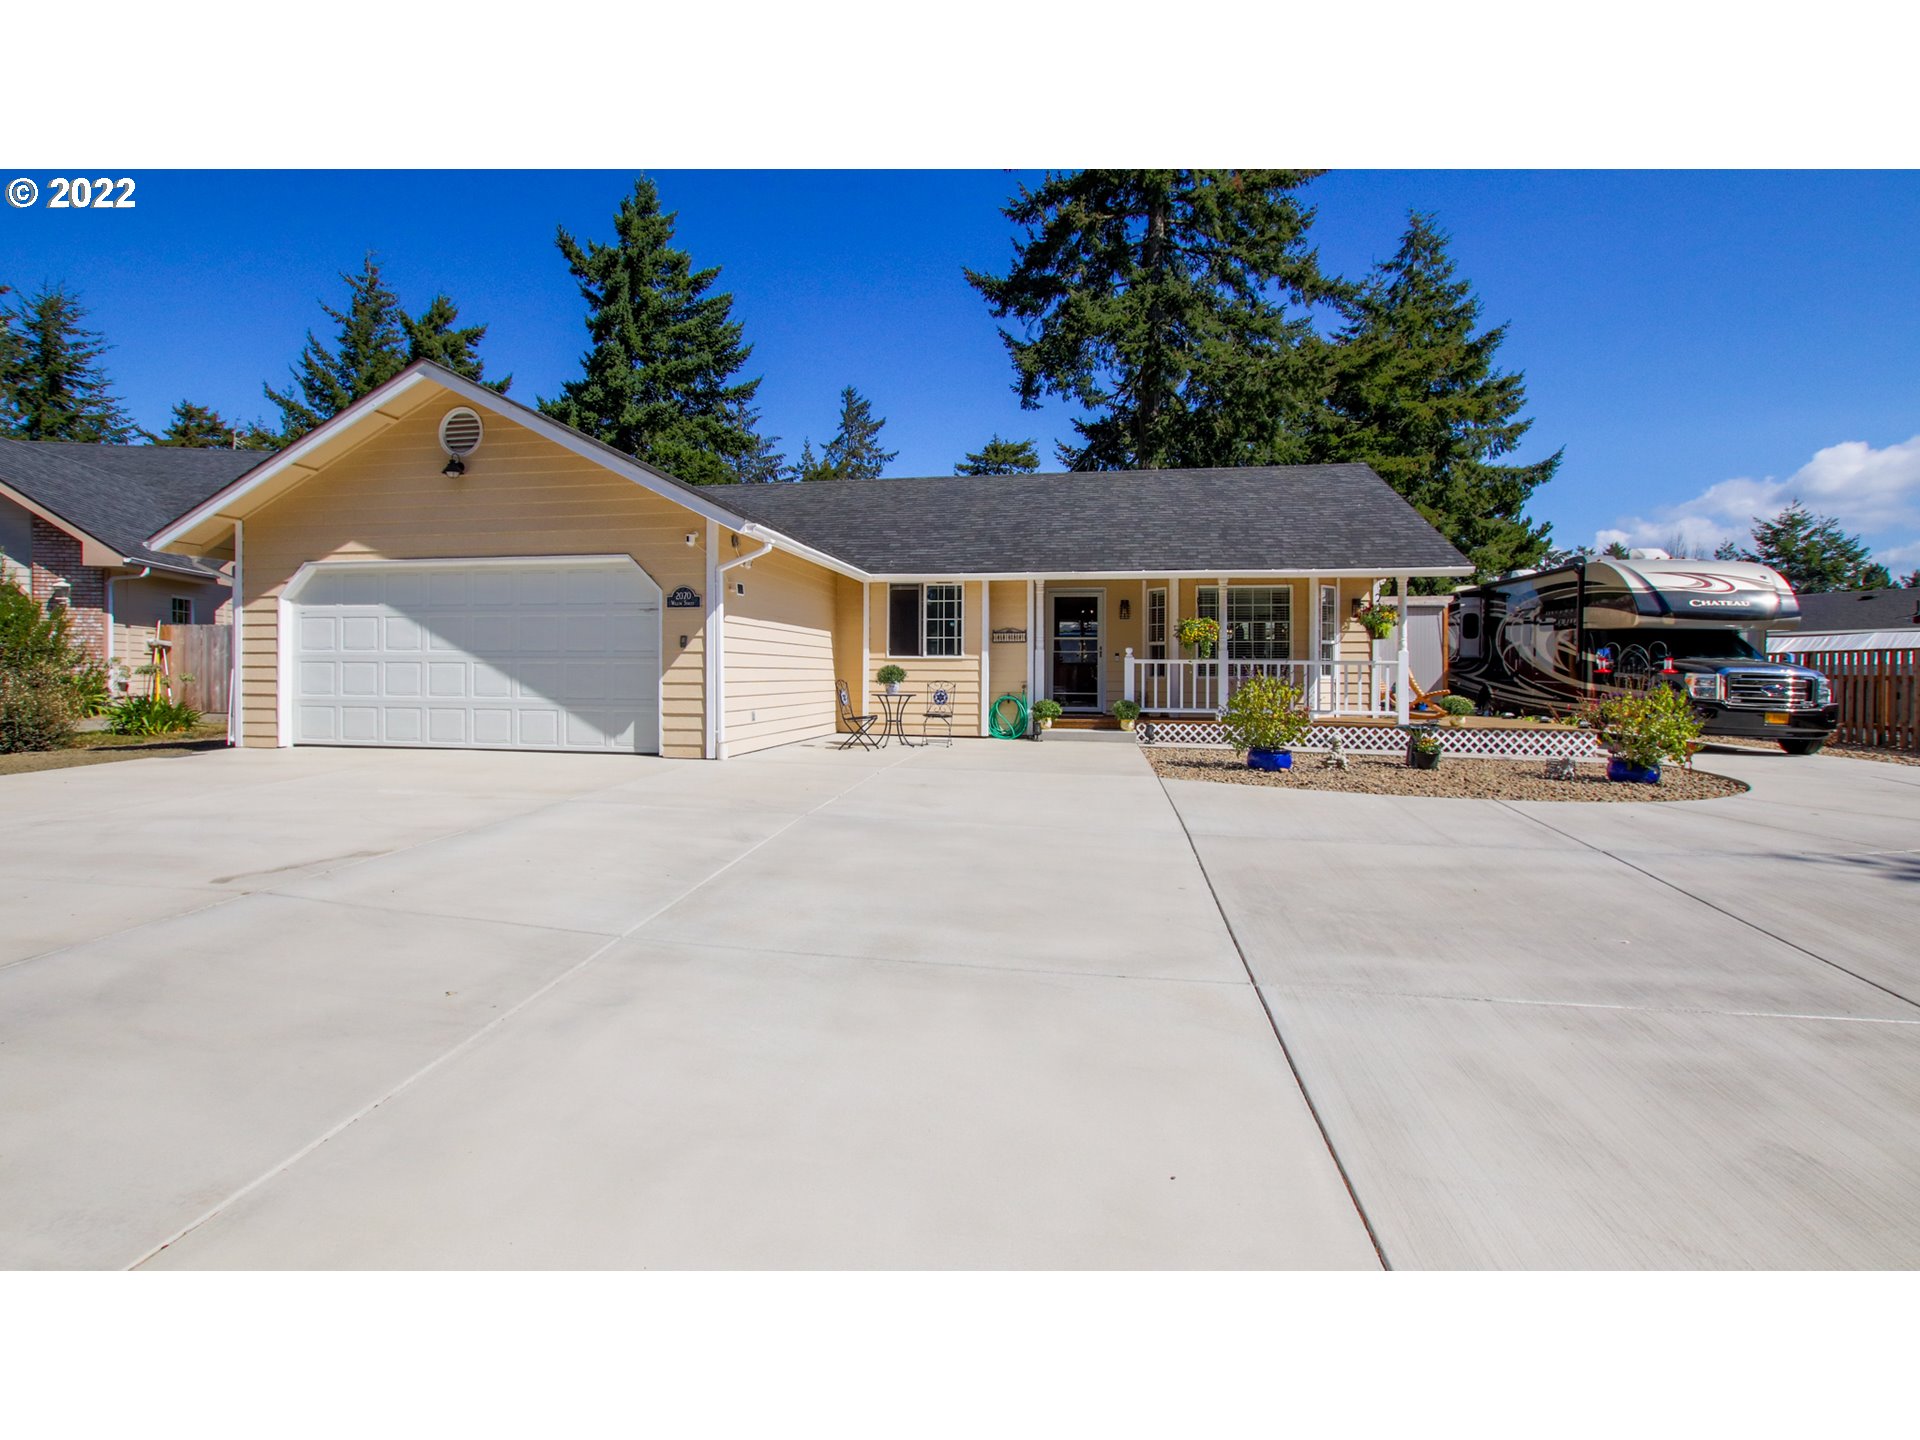 2070 WILLOW ST, Florence, OR 97439